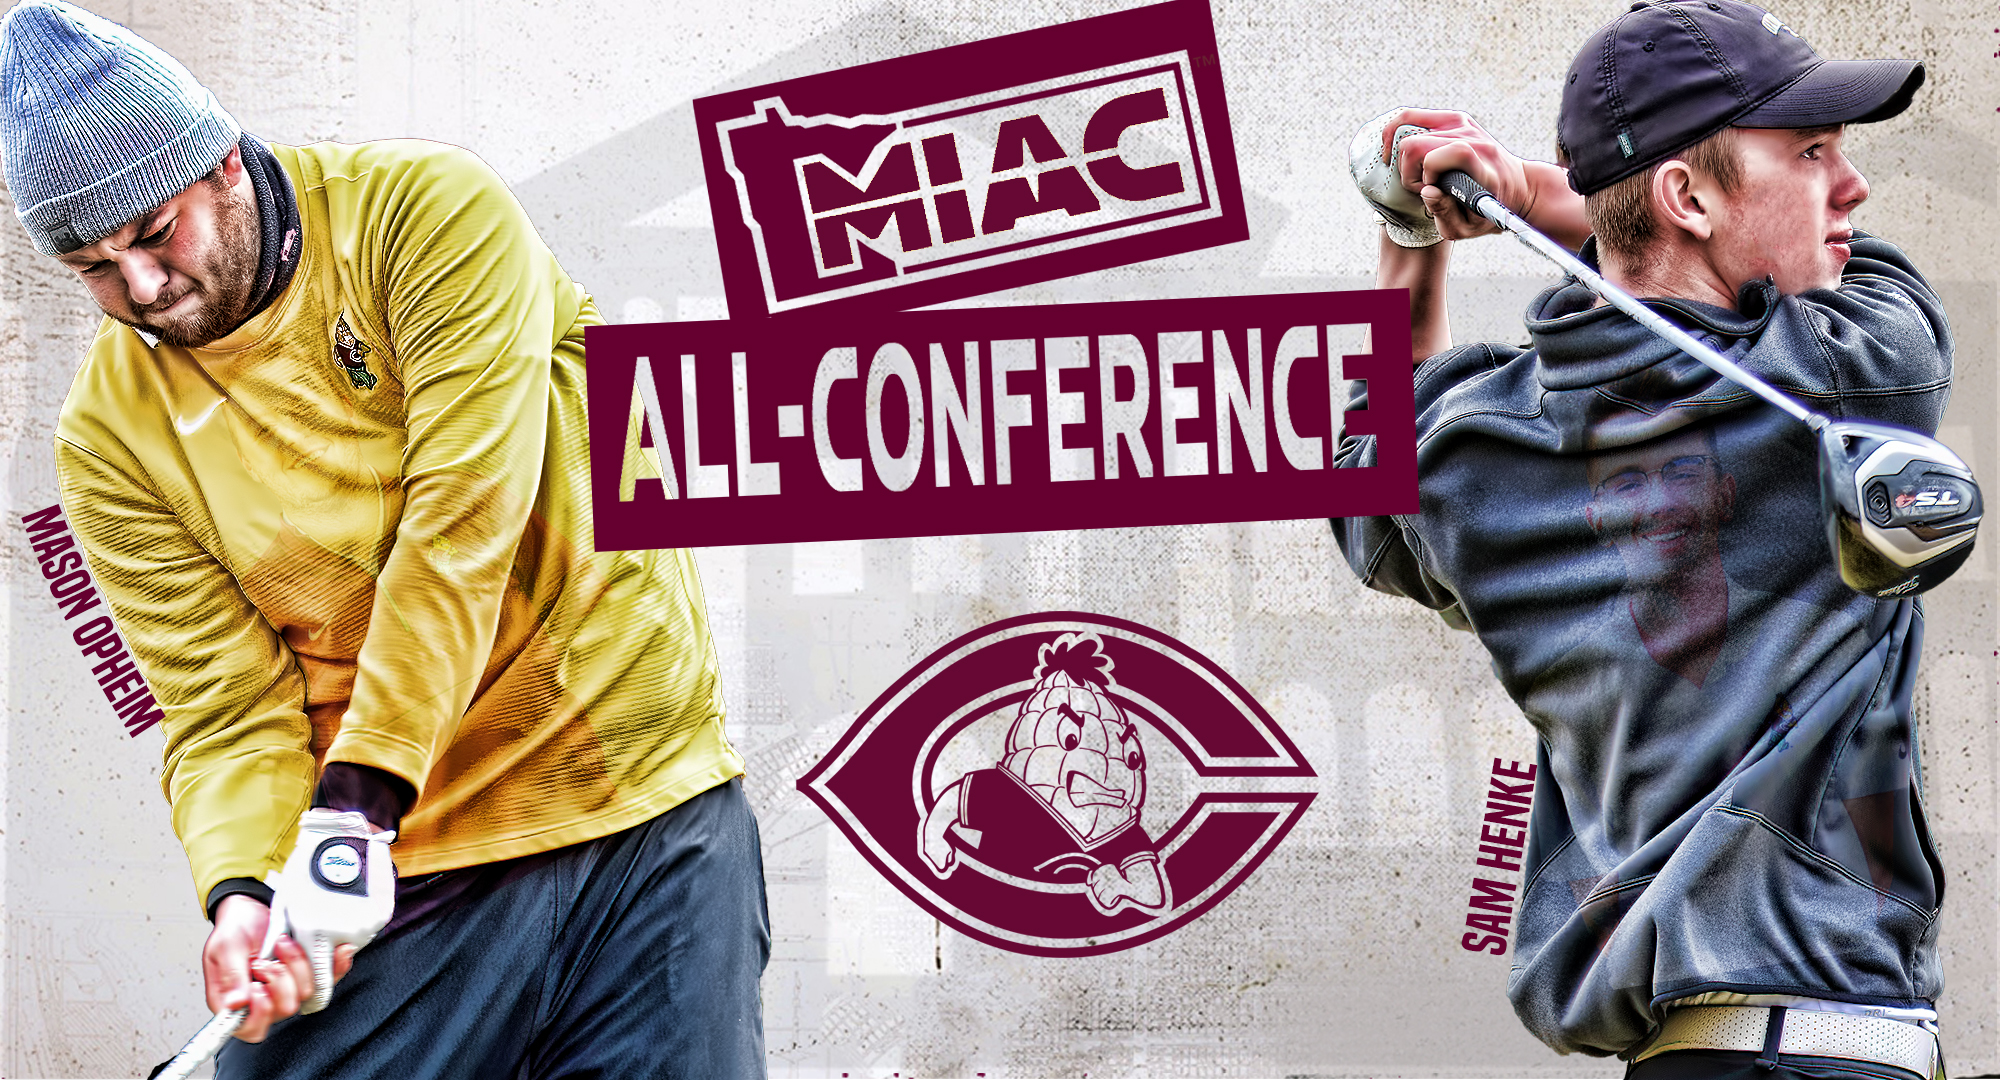 Mason Opheim (L) and Sam Henke earned their first-ever All-Conference honor by virtue of their Top 10 finish at the recently complete MIAC Championship Meet.